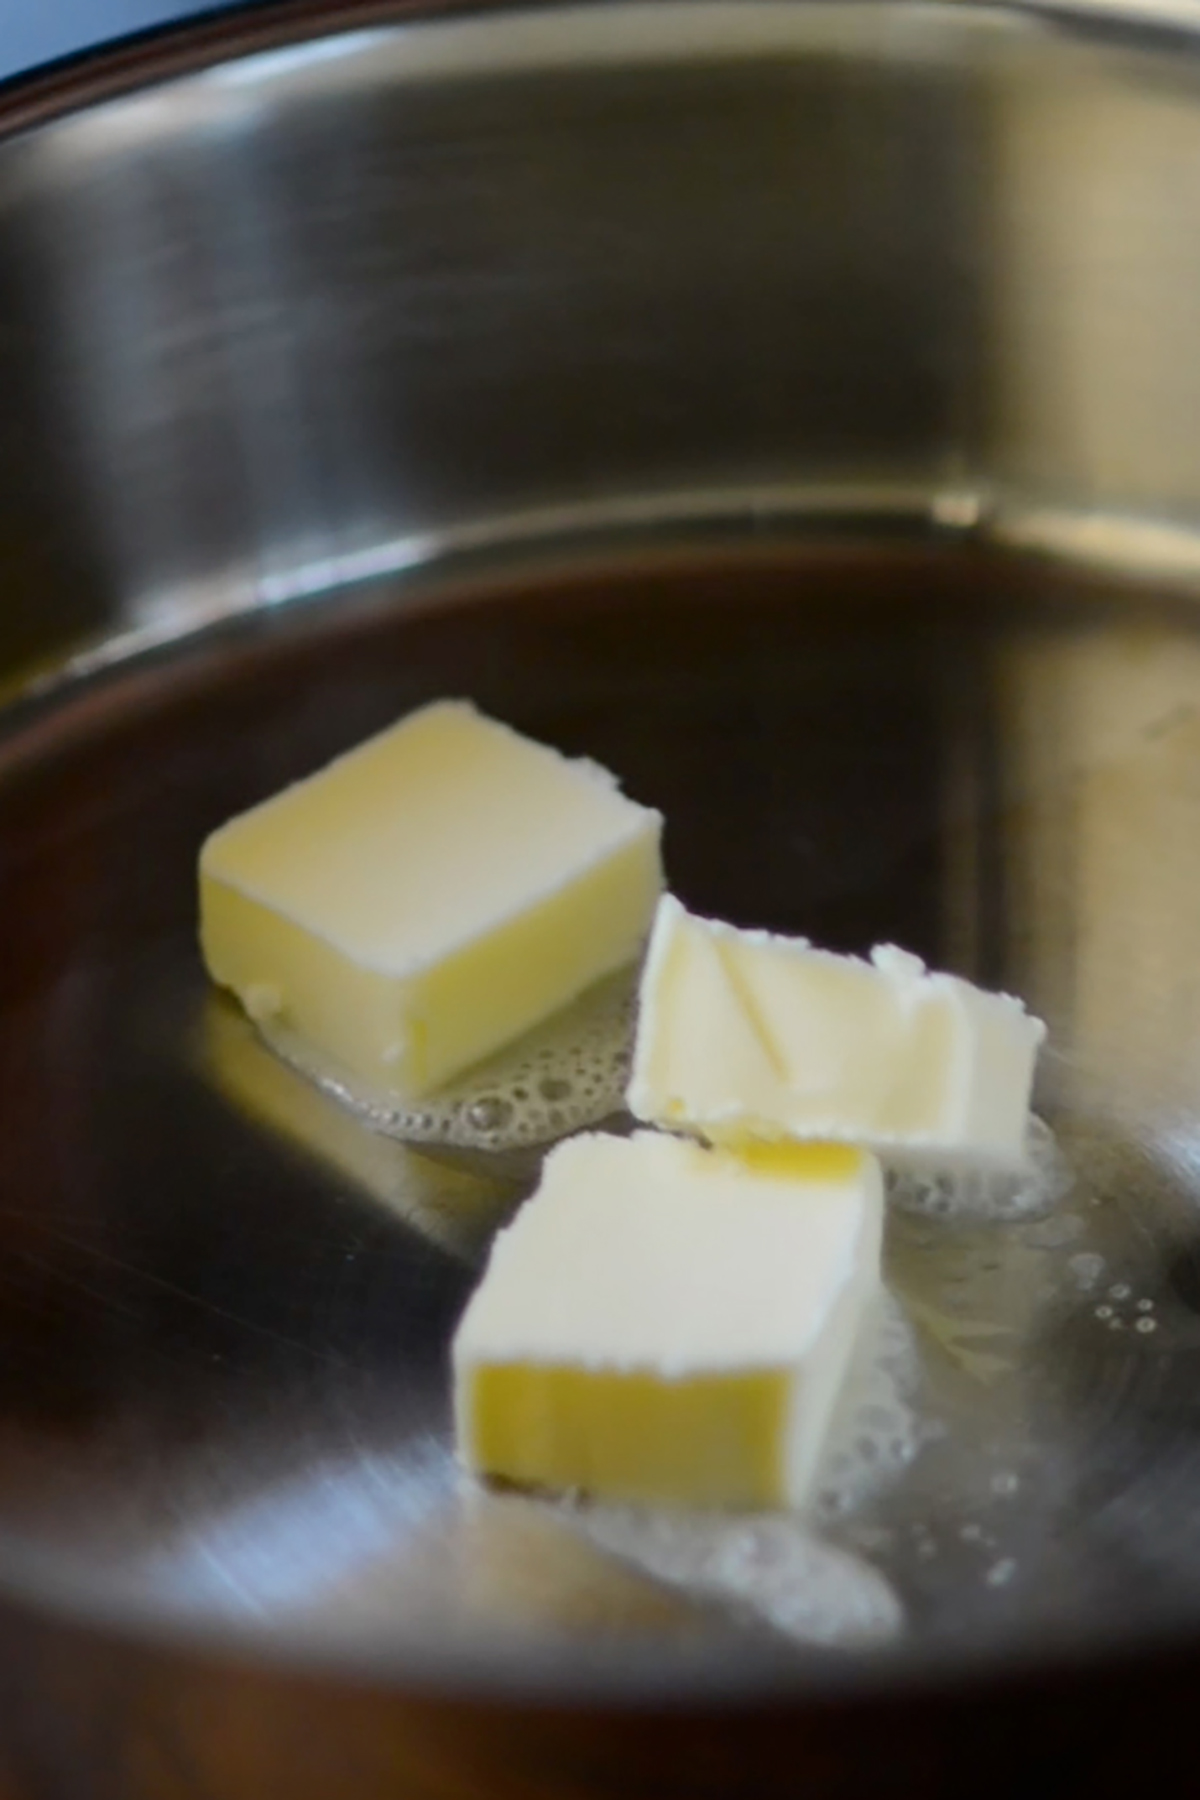 Butter melting in a sauce pan.